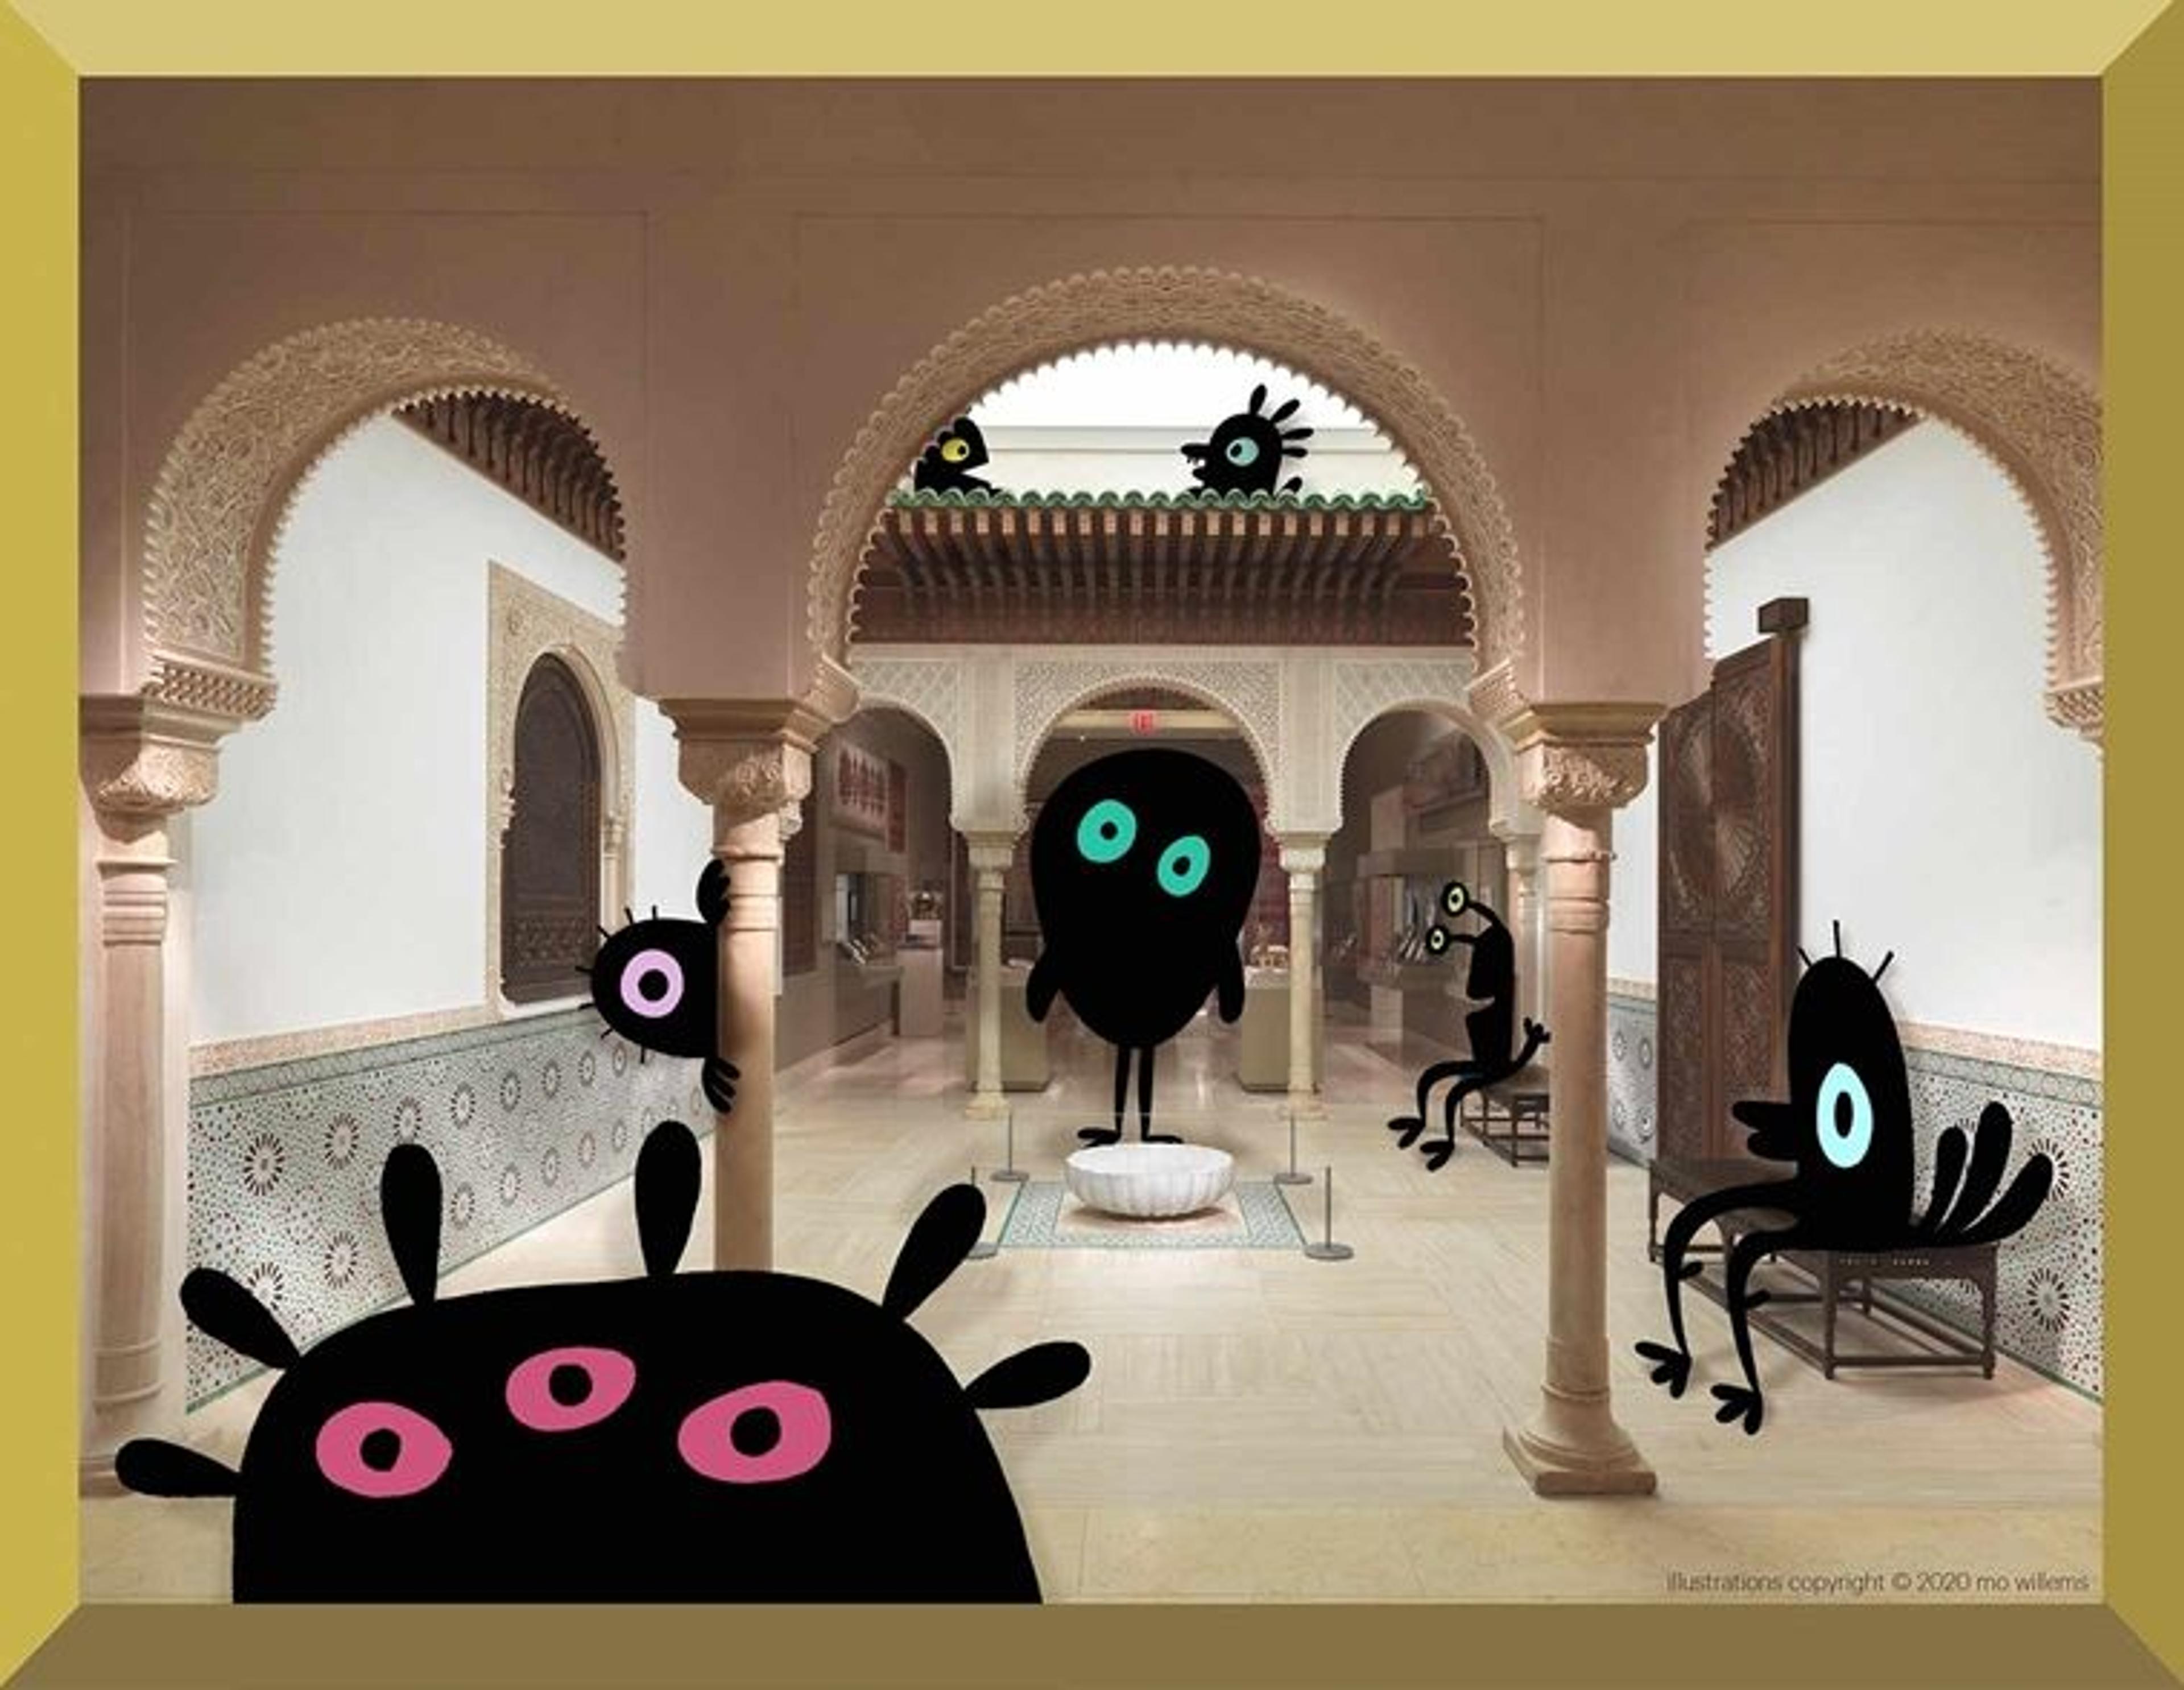 A Moroccan-style courtyard bounded by pillars on two sides with ornate carvings above. In the center sits a low, white and grey fountain. Quirky, simple black cartoon creatures lounge around the space, with brightly colored eyes.